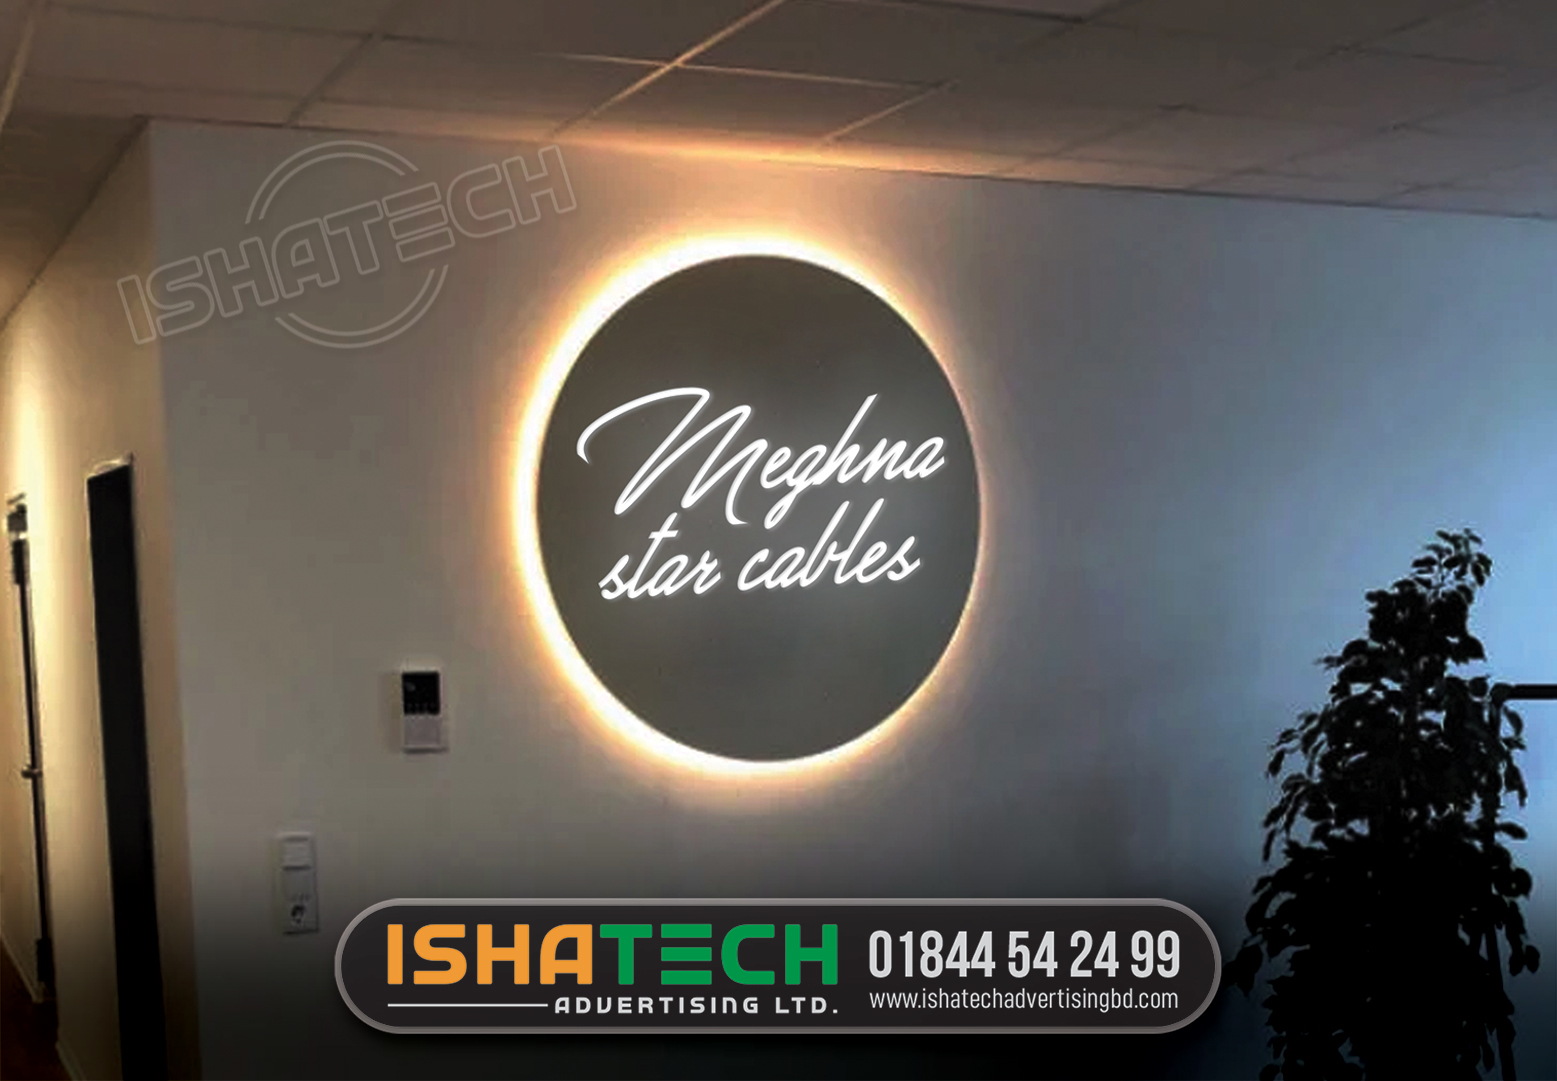 ROUND SIGN, BELL SIGNS, NEON ACRYLIC 3D LETTER SIGNAGE, ADVERTISING AGENCY, OFFICE SIGNAGE, MEGHNA GROUP OFFICE LETTER SIGNAGE.